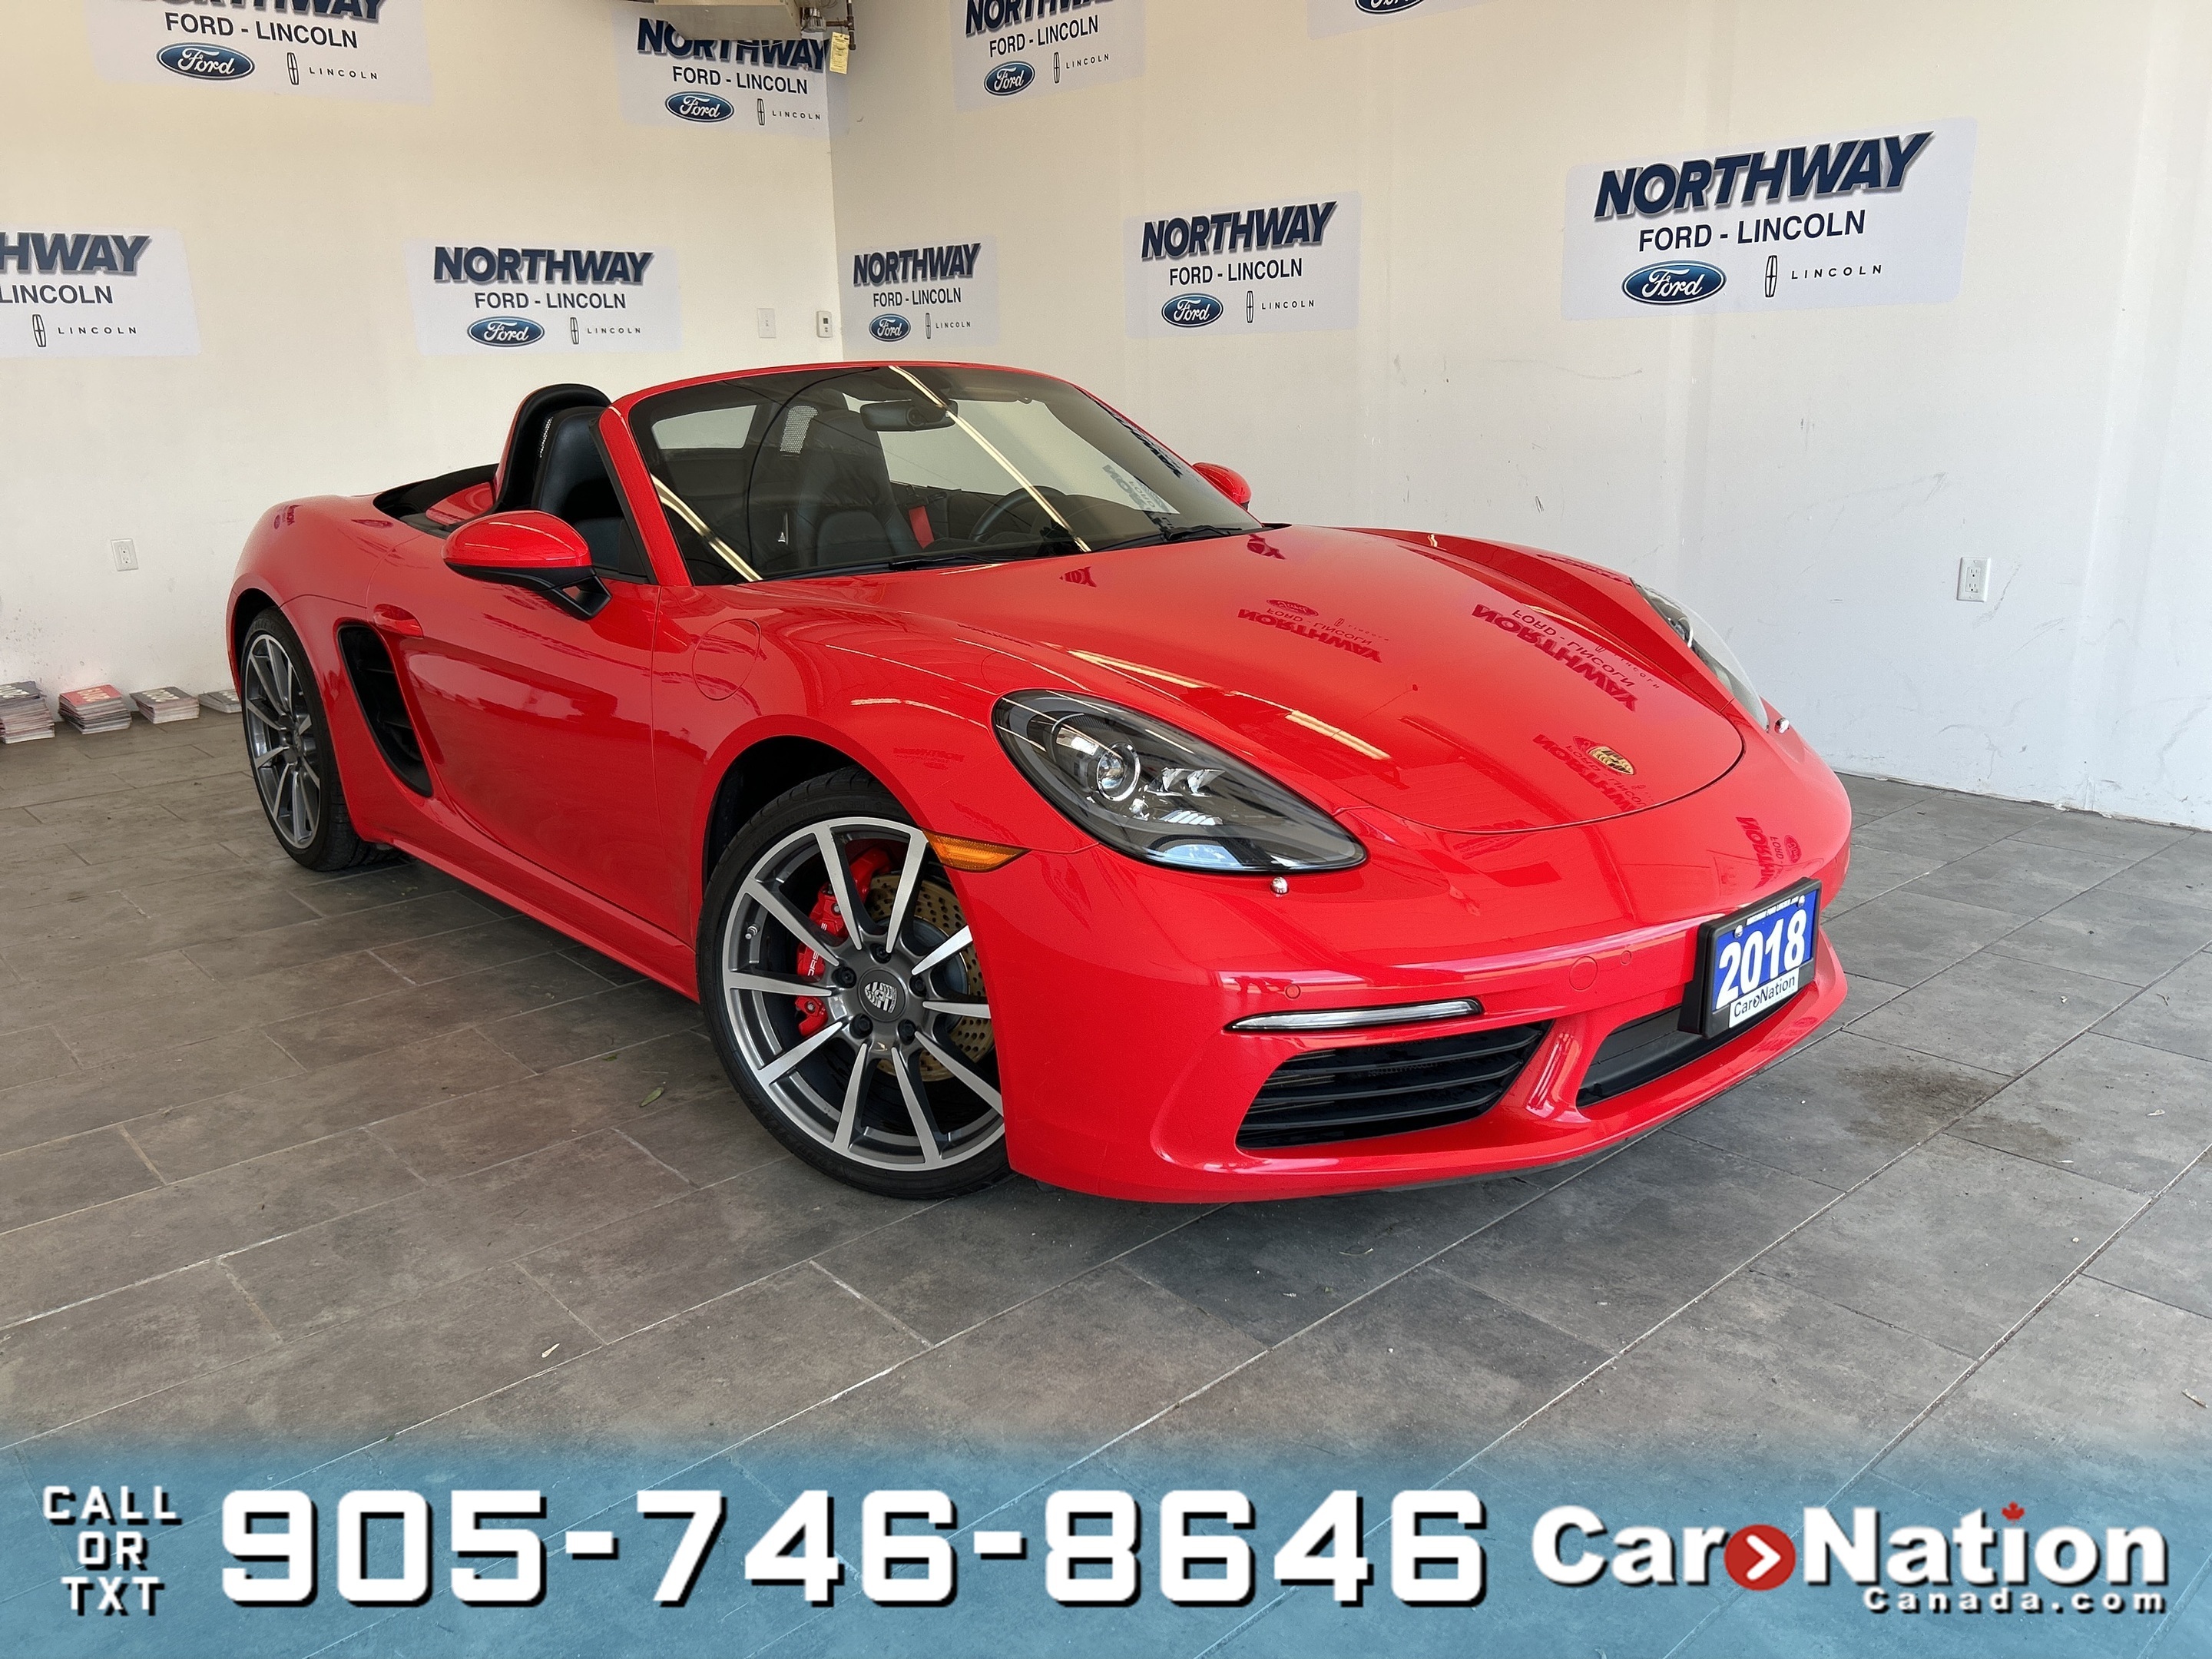 2018 Porsche 718 Boxster S ROADSTER | 6 SPEED M/T | OPTIONS LISTED BELOW! 